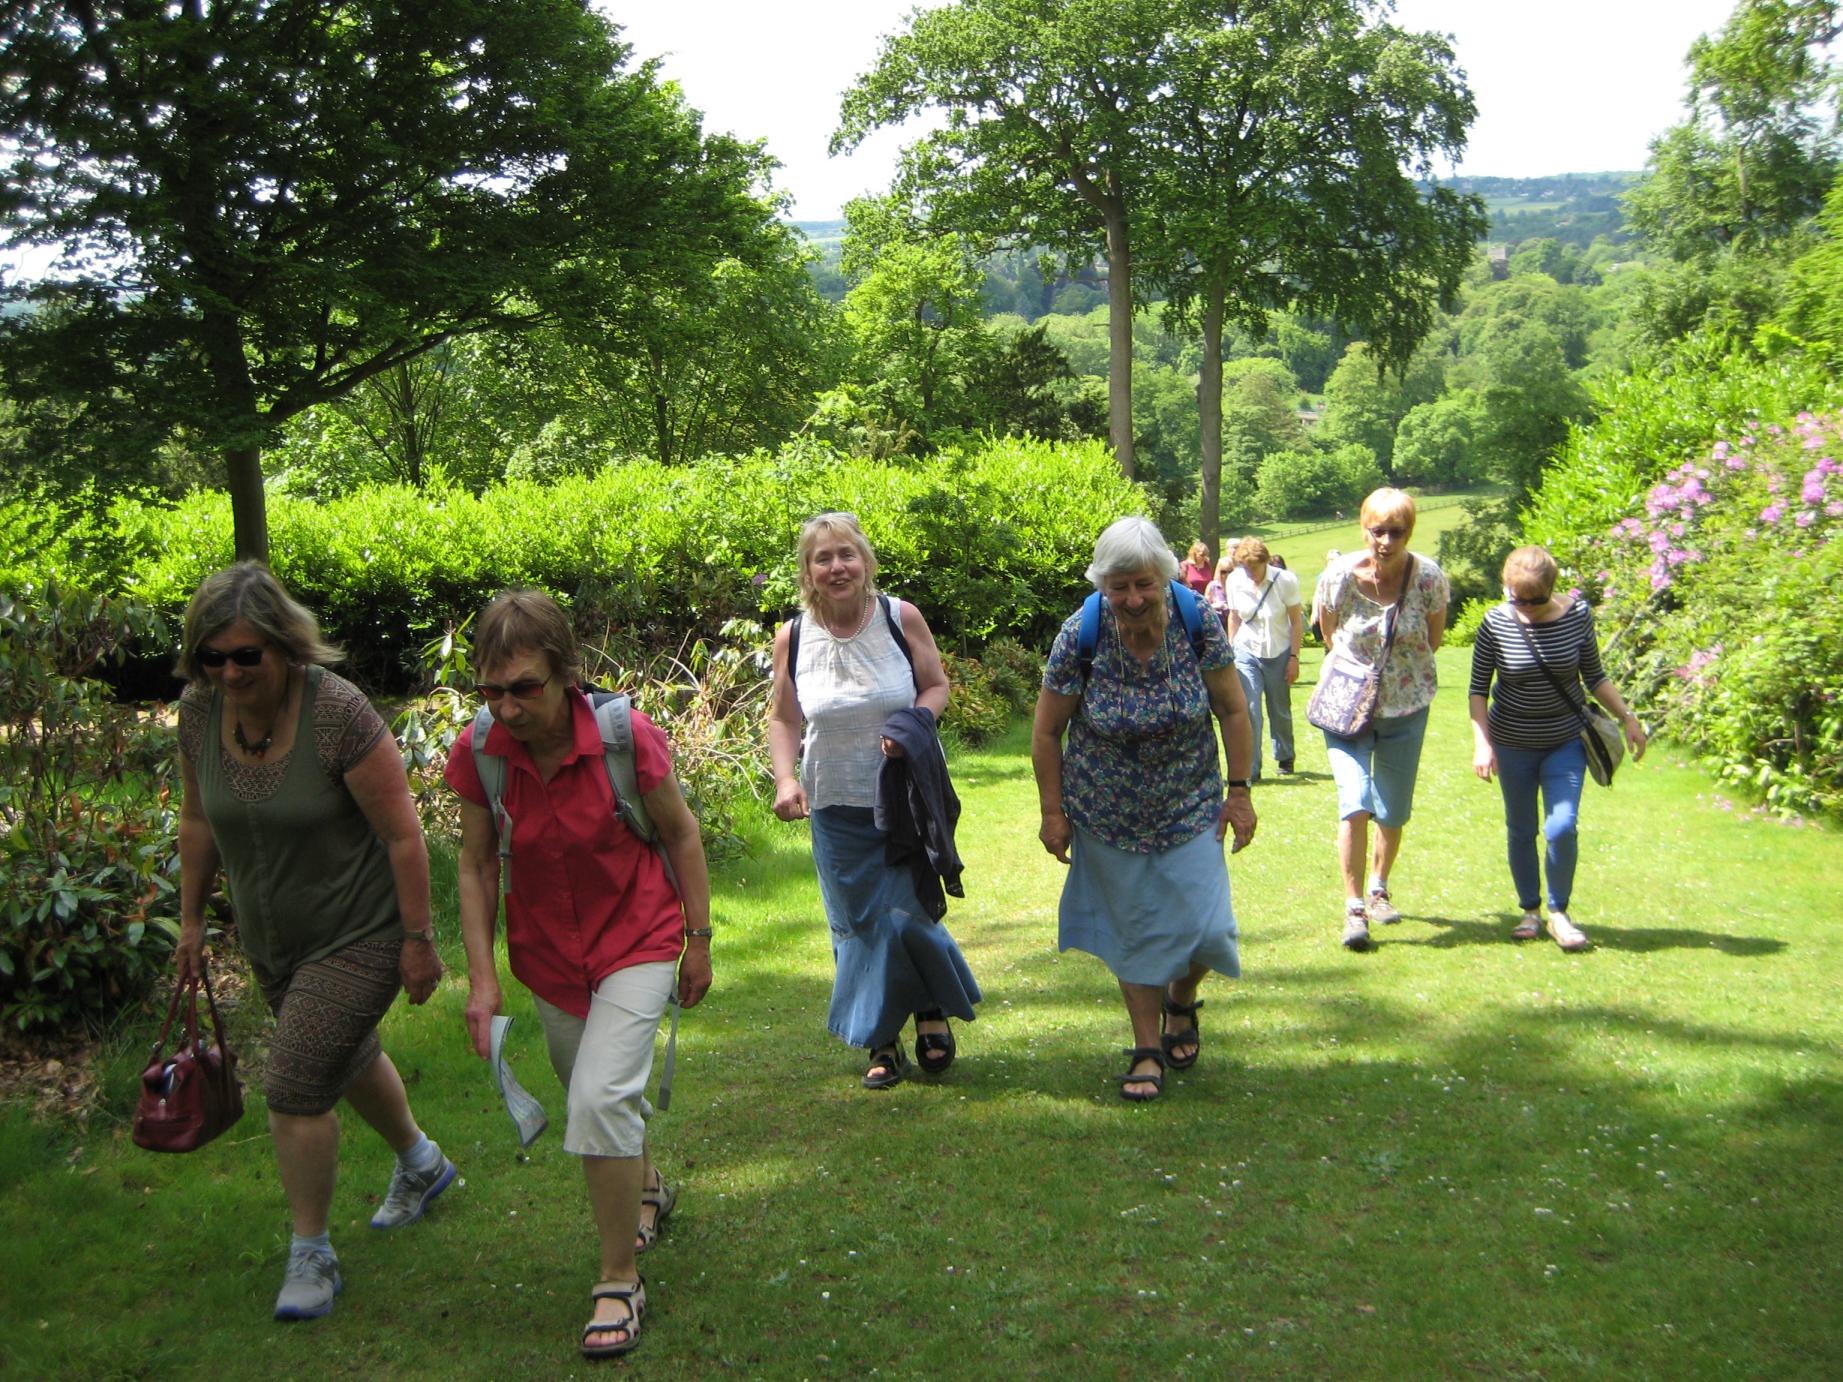 Wednesday 24th May, gathering of Hens at Cliveden House, Bucks (Photo by Hazel Carmichael).